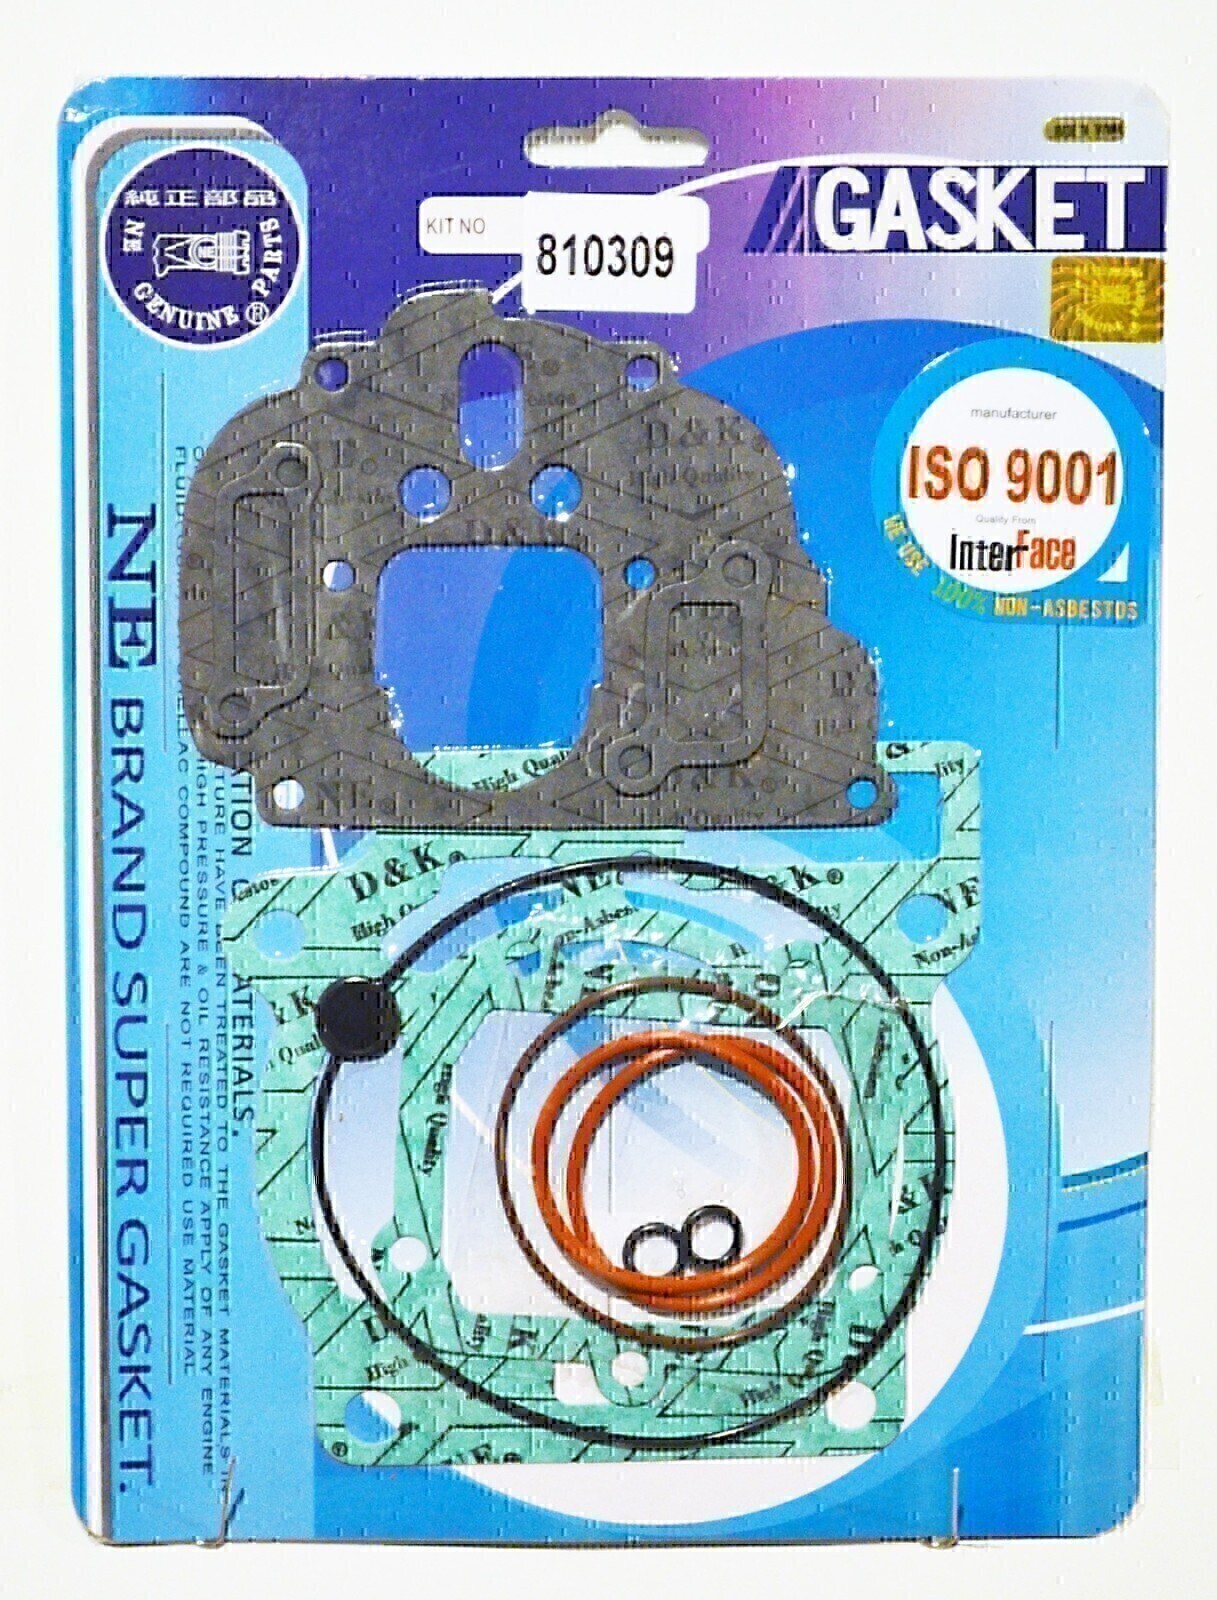 TOP END GASKET KIT FOR KTM 125SX / 125EXC 2002 2003 2004 2005 2006